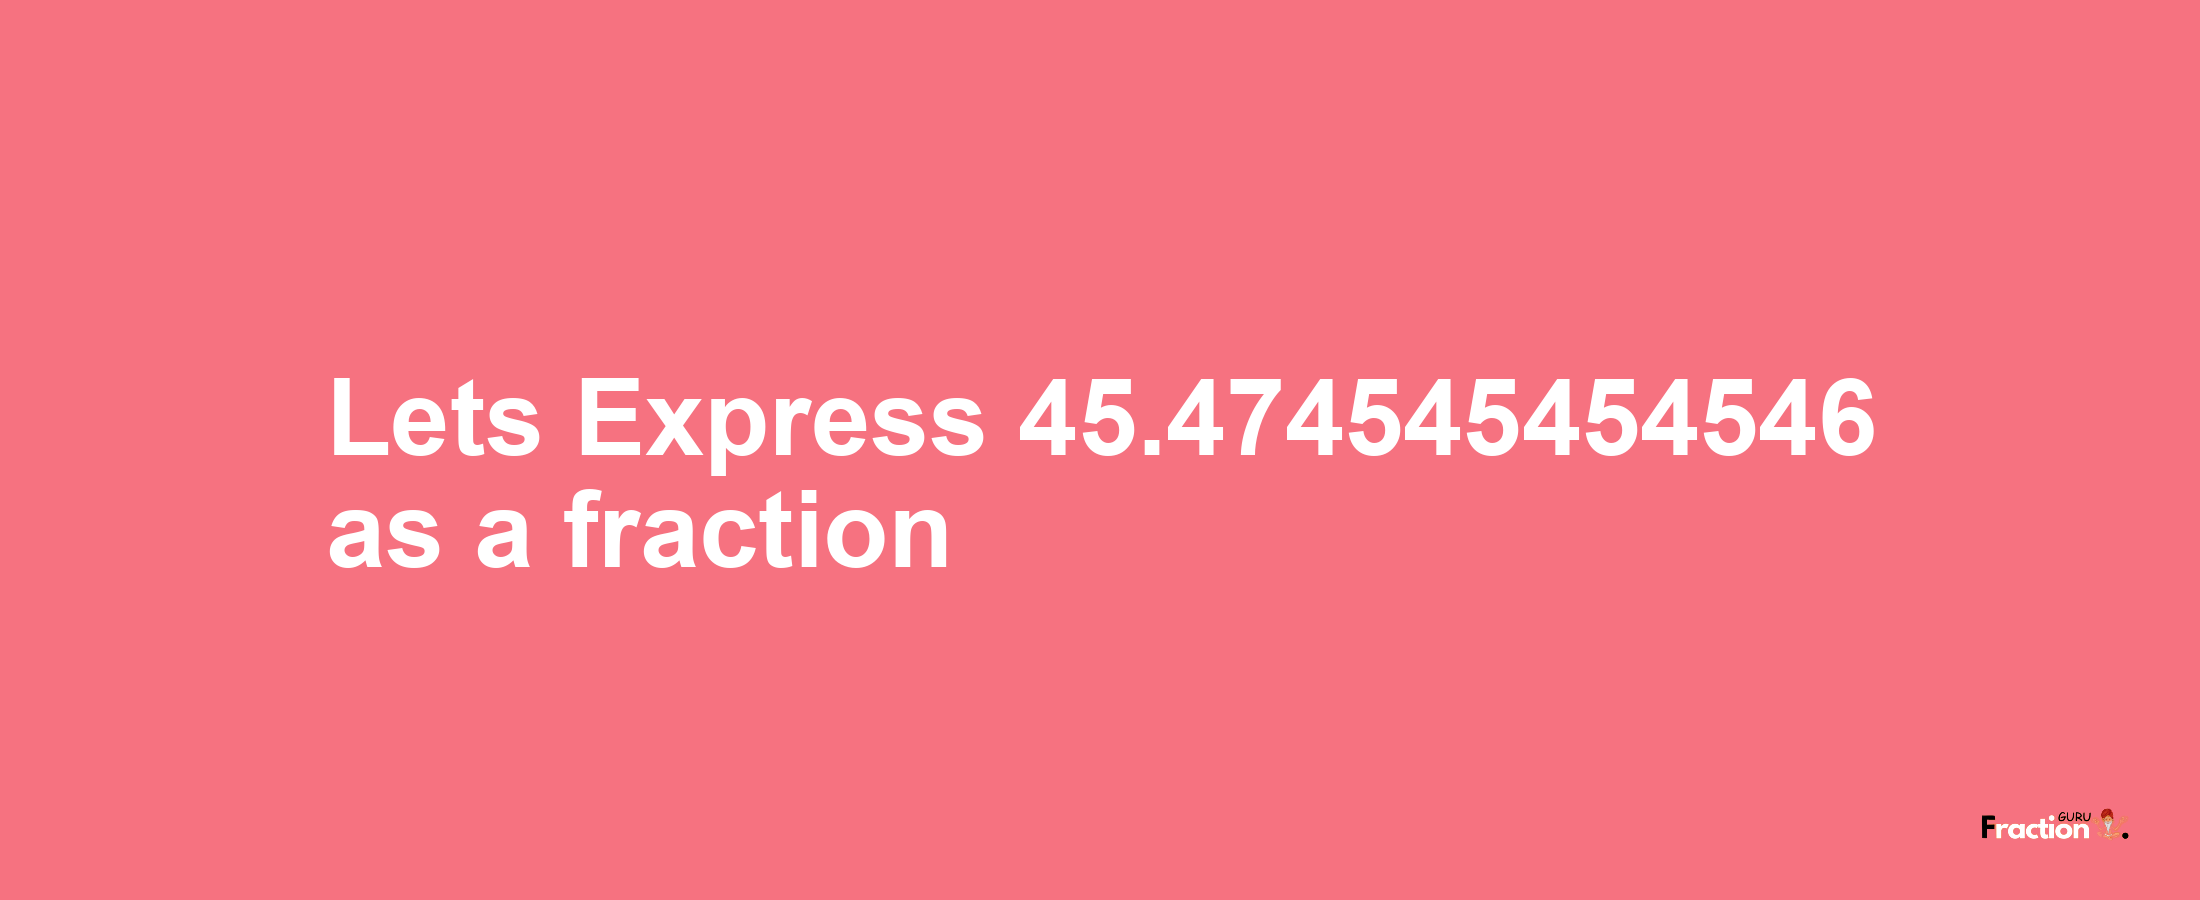 Lets Express 45.474545454546 as afraction